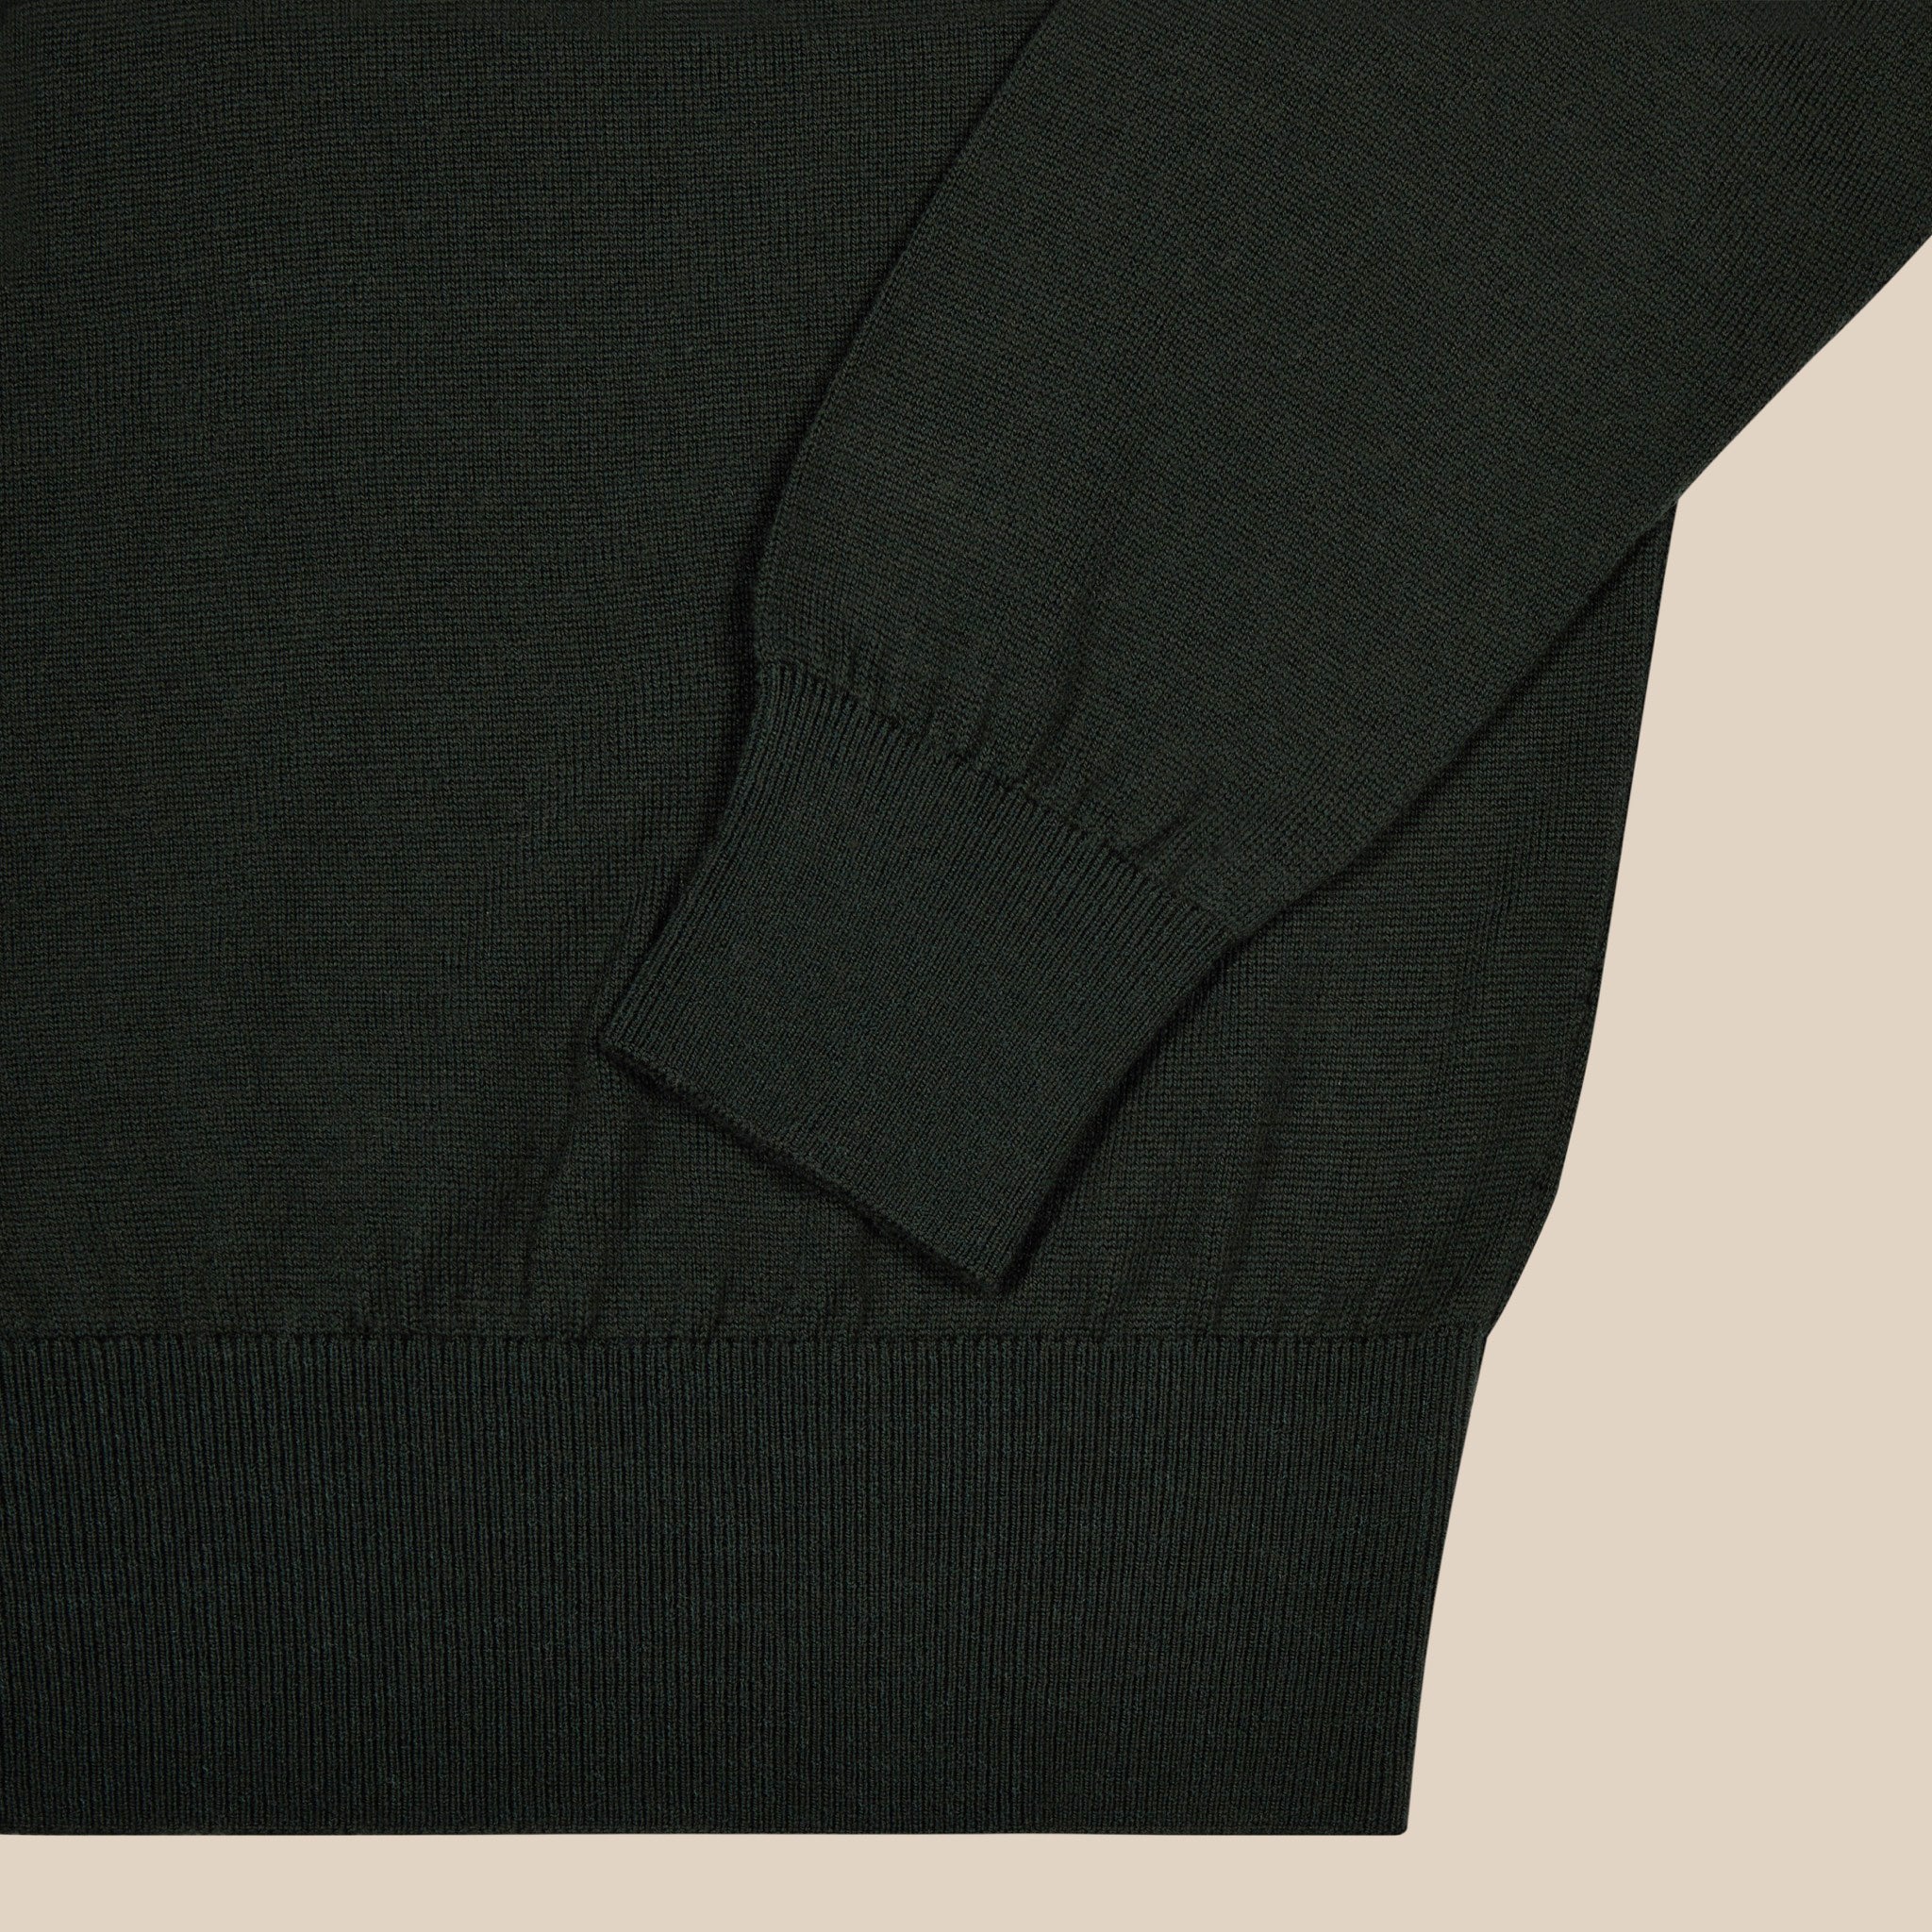 Merino father's polo shirt in forest green